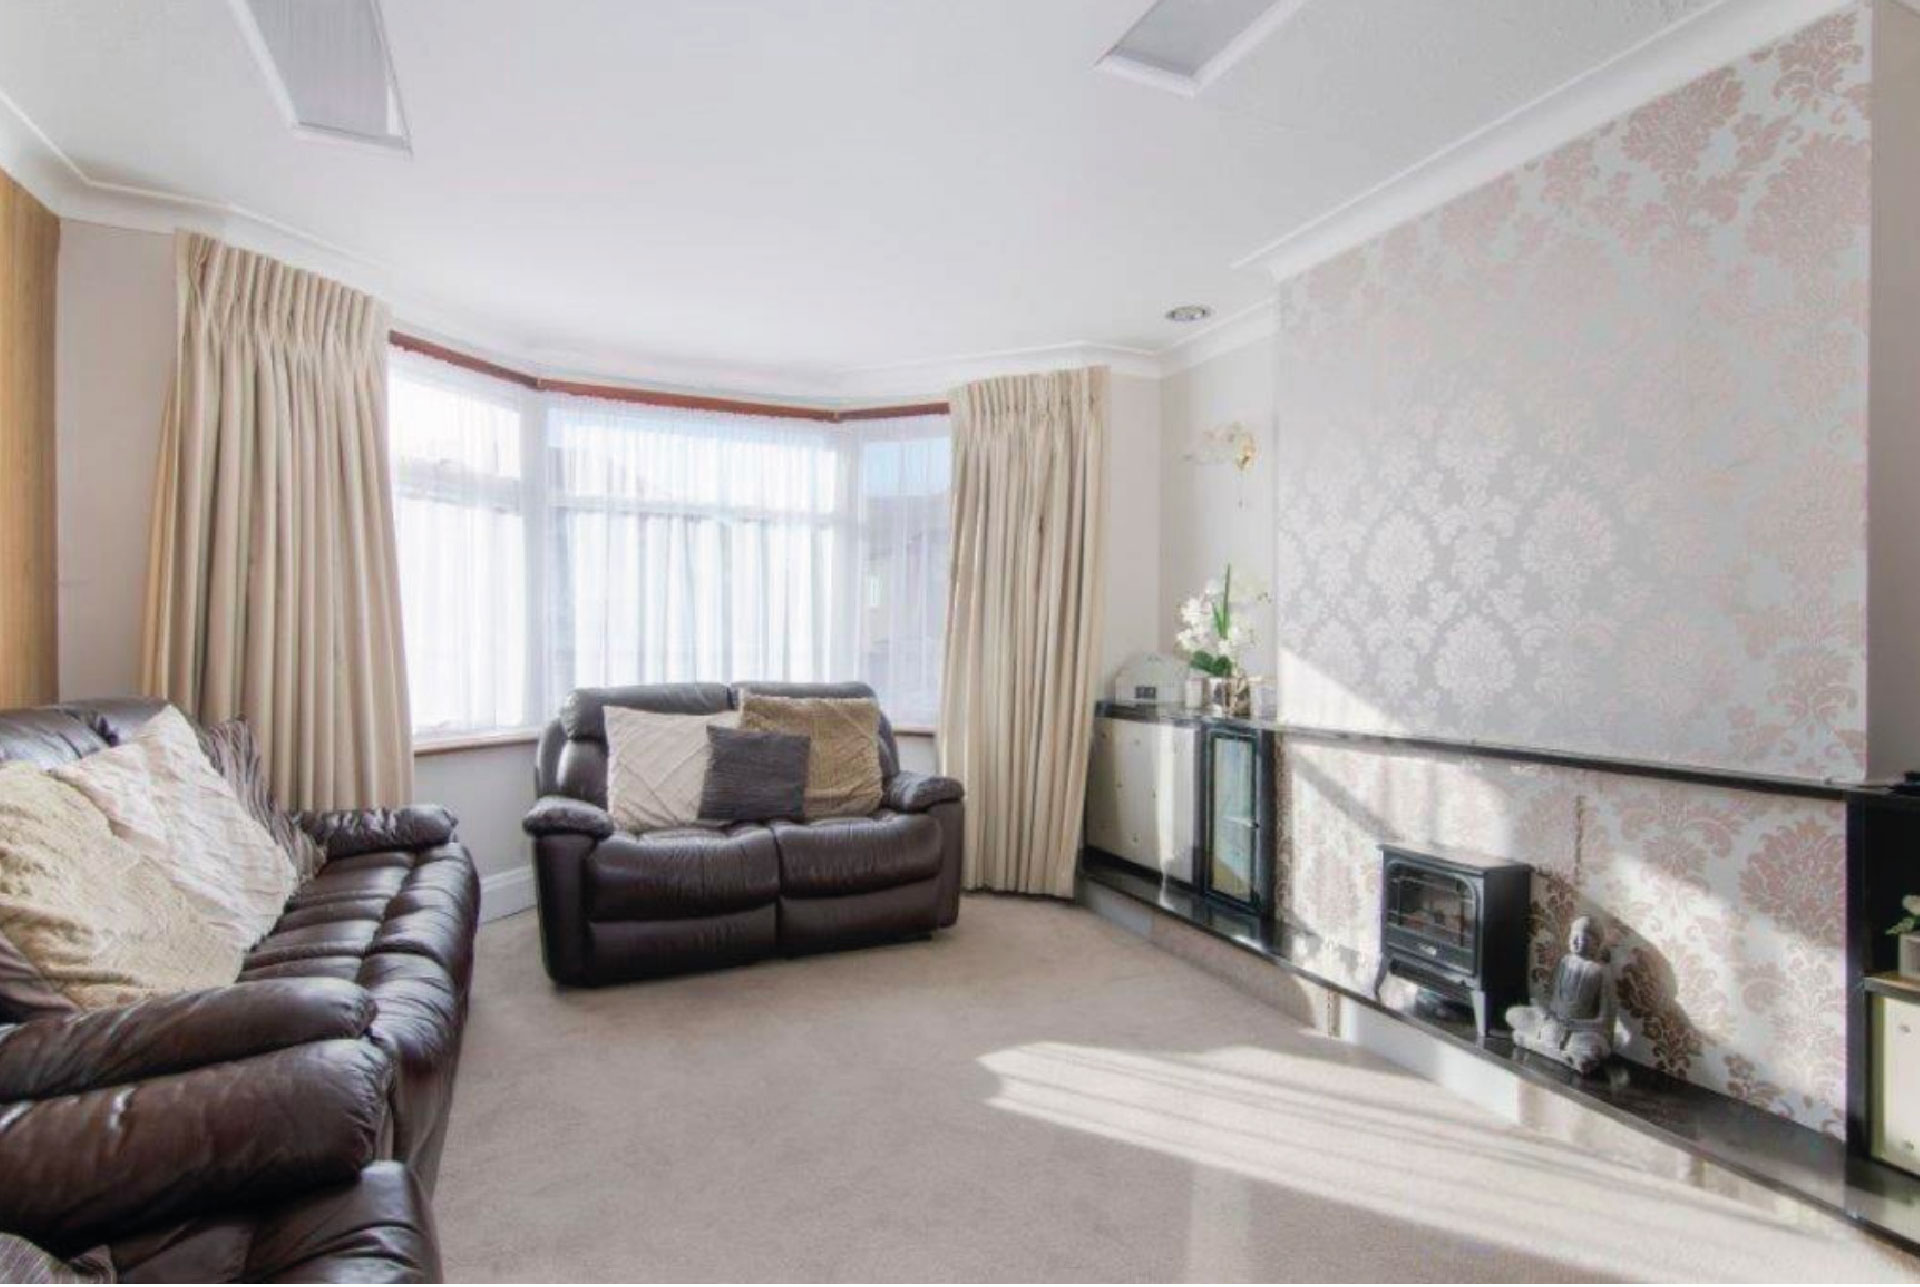 A very plain living room with beige wallpaper and carpets. Furnished with brown leather sofas and built-in cupboards